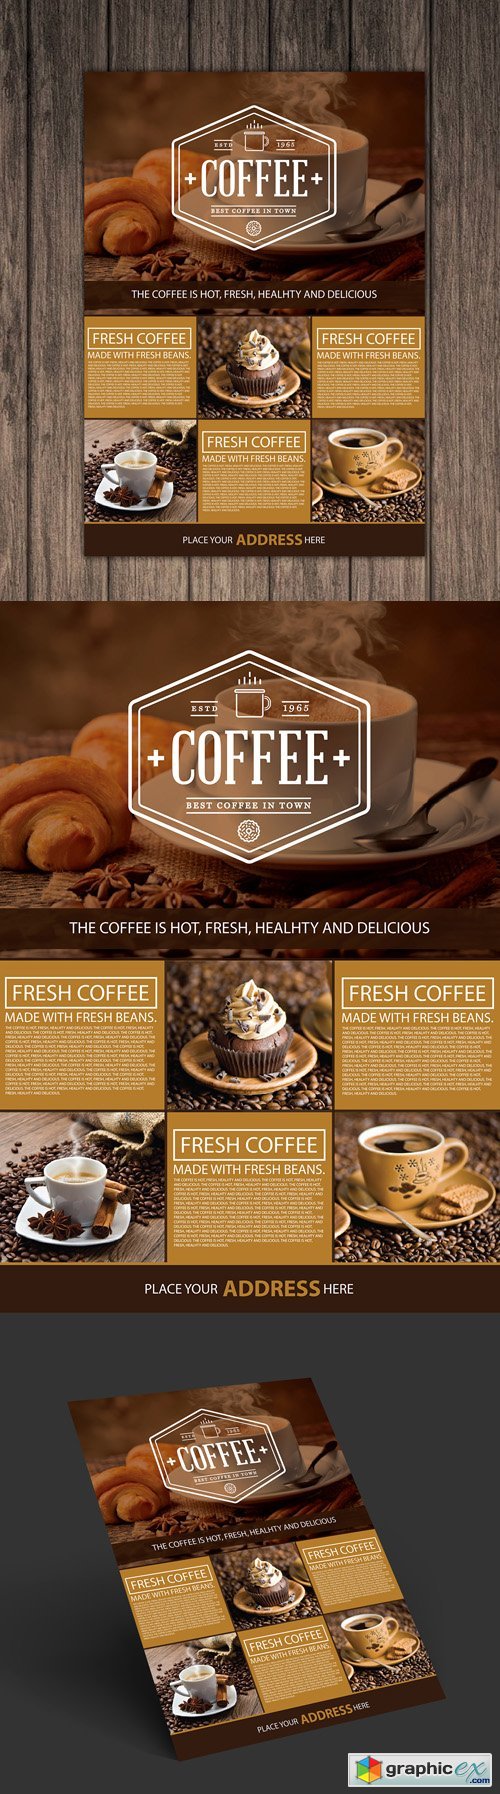 Coffee Shop A4 Flyer Template